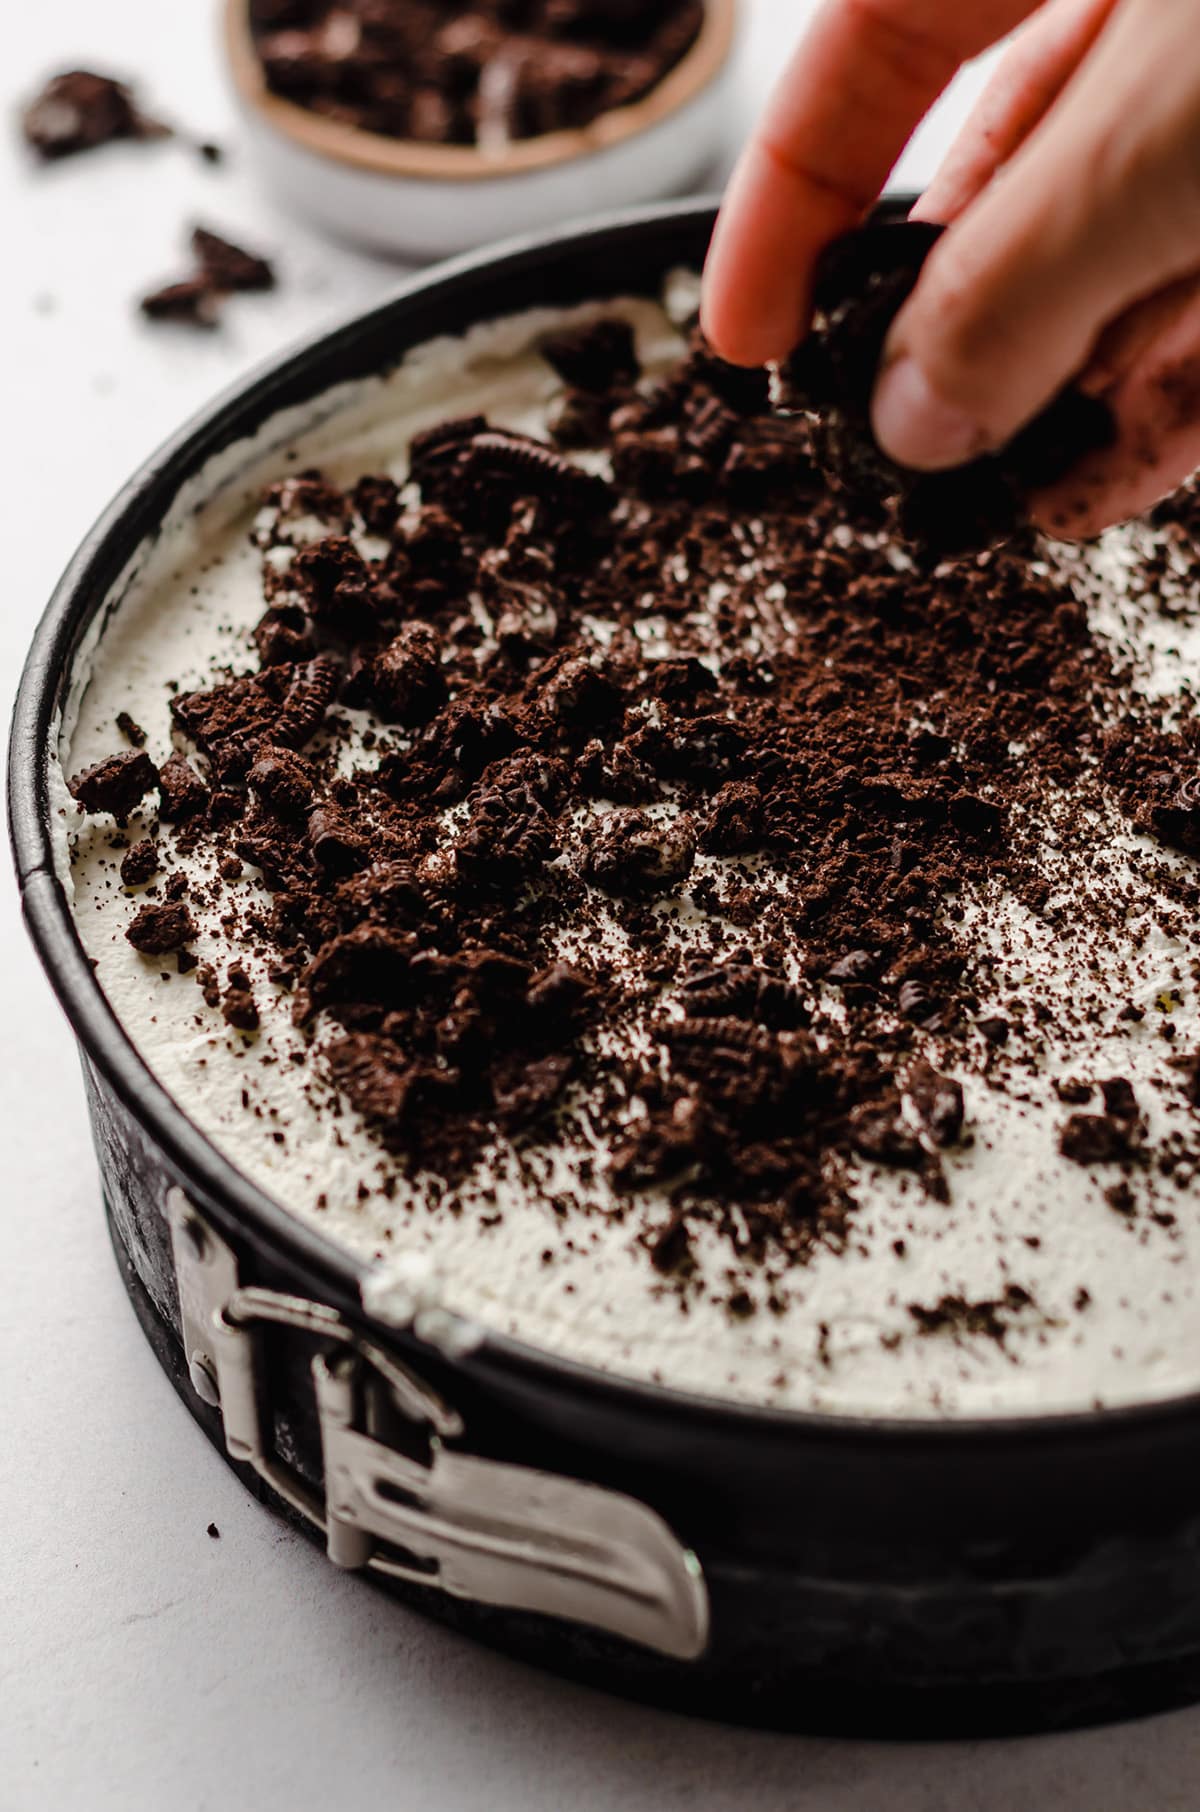 Sprinkling Oreo cookie crumbs on top of an ice cream cake.